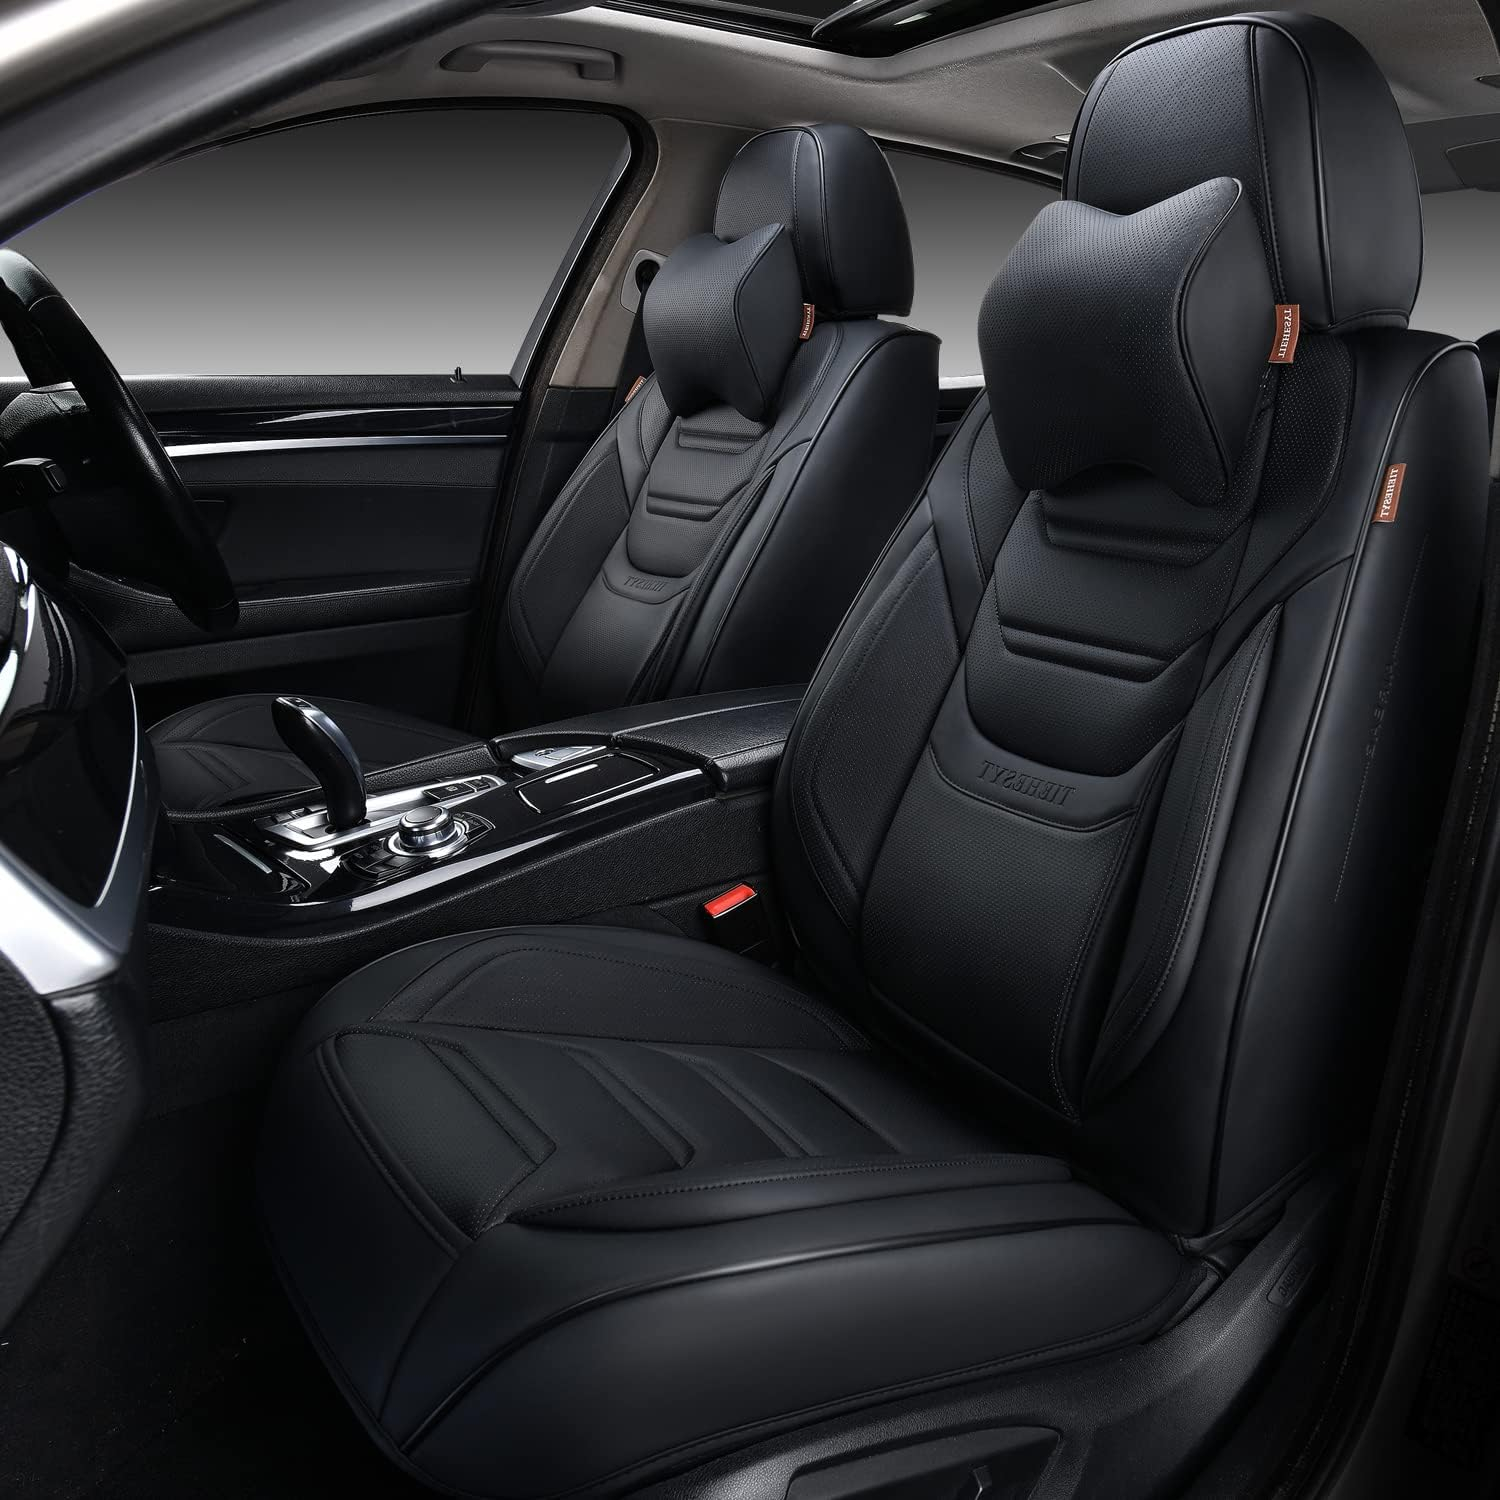 Full Set of Black Car Seat Covers for Front and Rear Seats, Including Headrests, with Breathable Leather for Enhanced Comfort